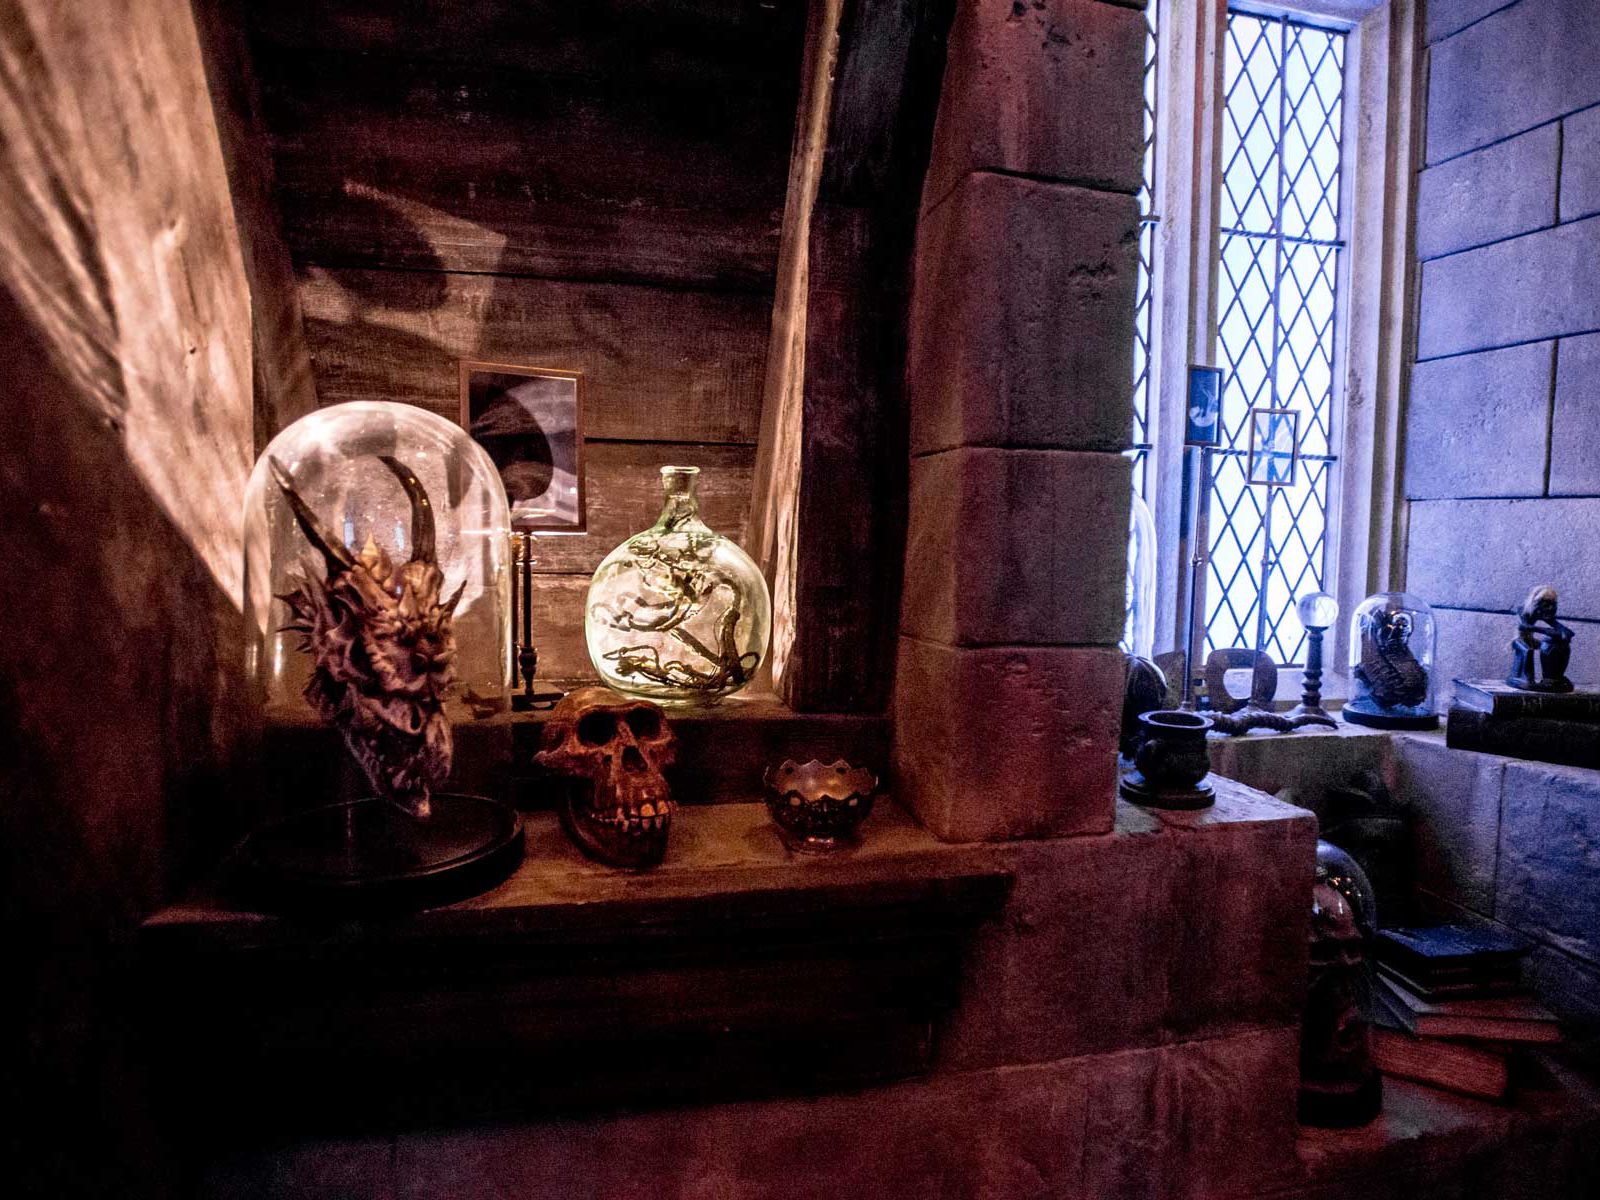 Enroll in Virtual Hogwarts Classes on This Harry Potter Fan Site